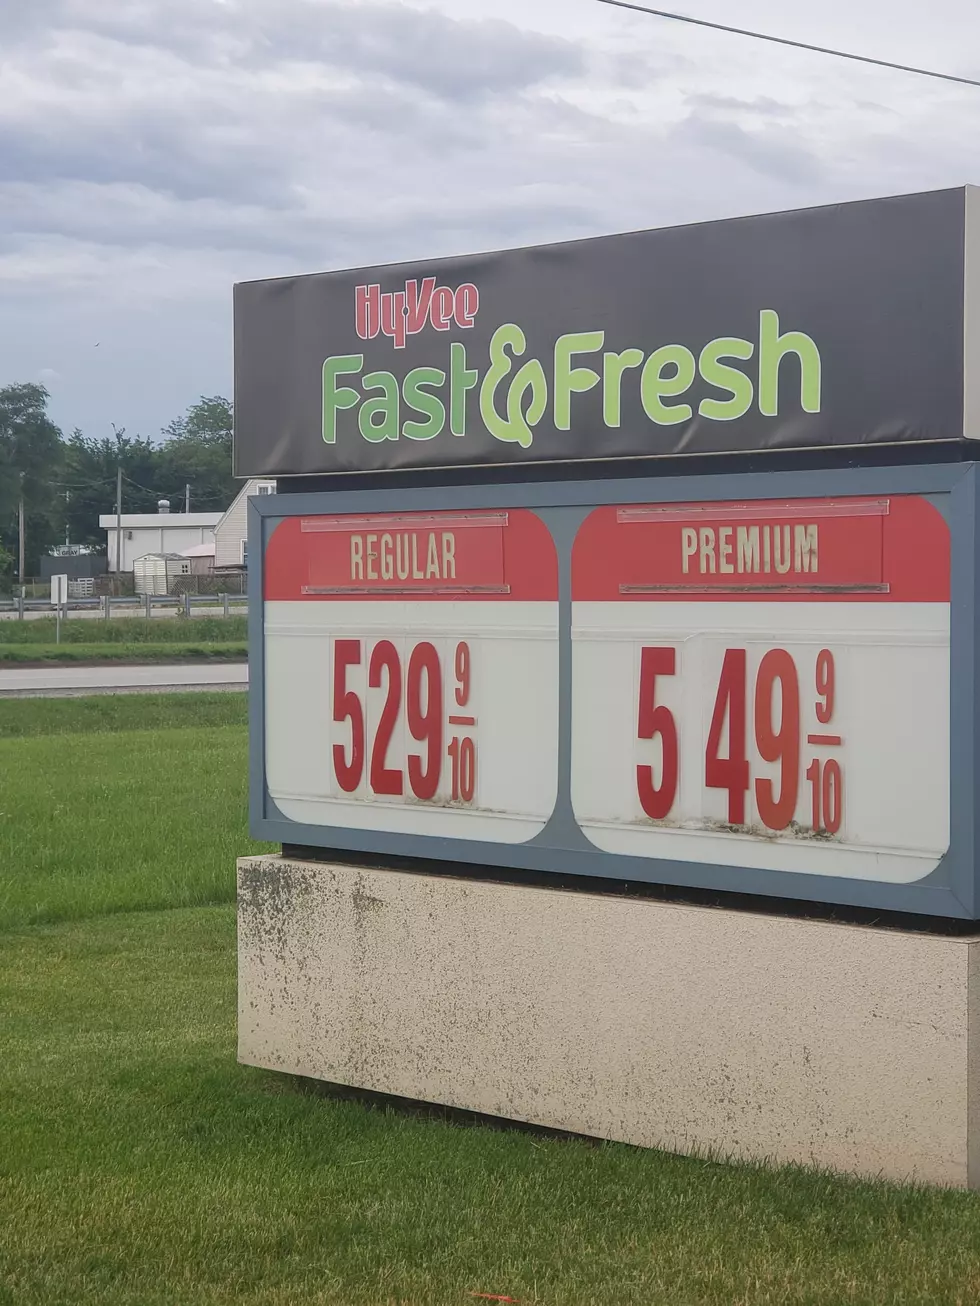 Gas Jumps 20 Cents Per Gallon Overnight At Quad City Gas Station